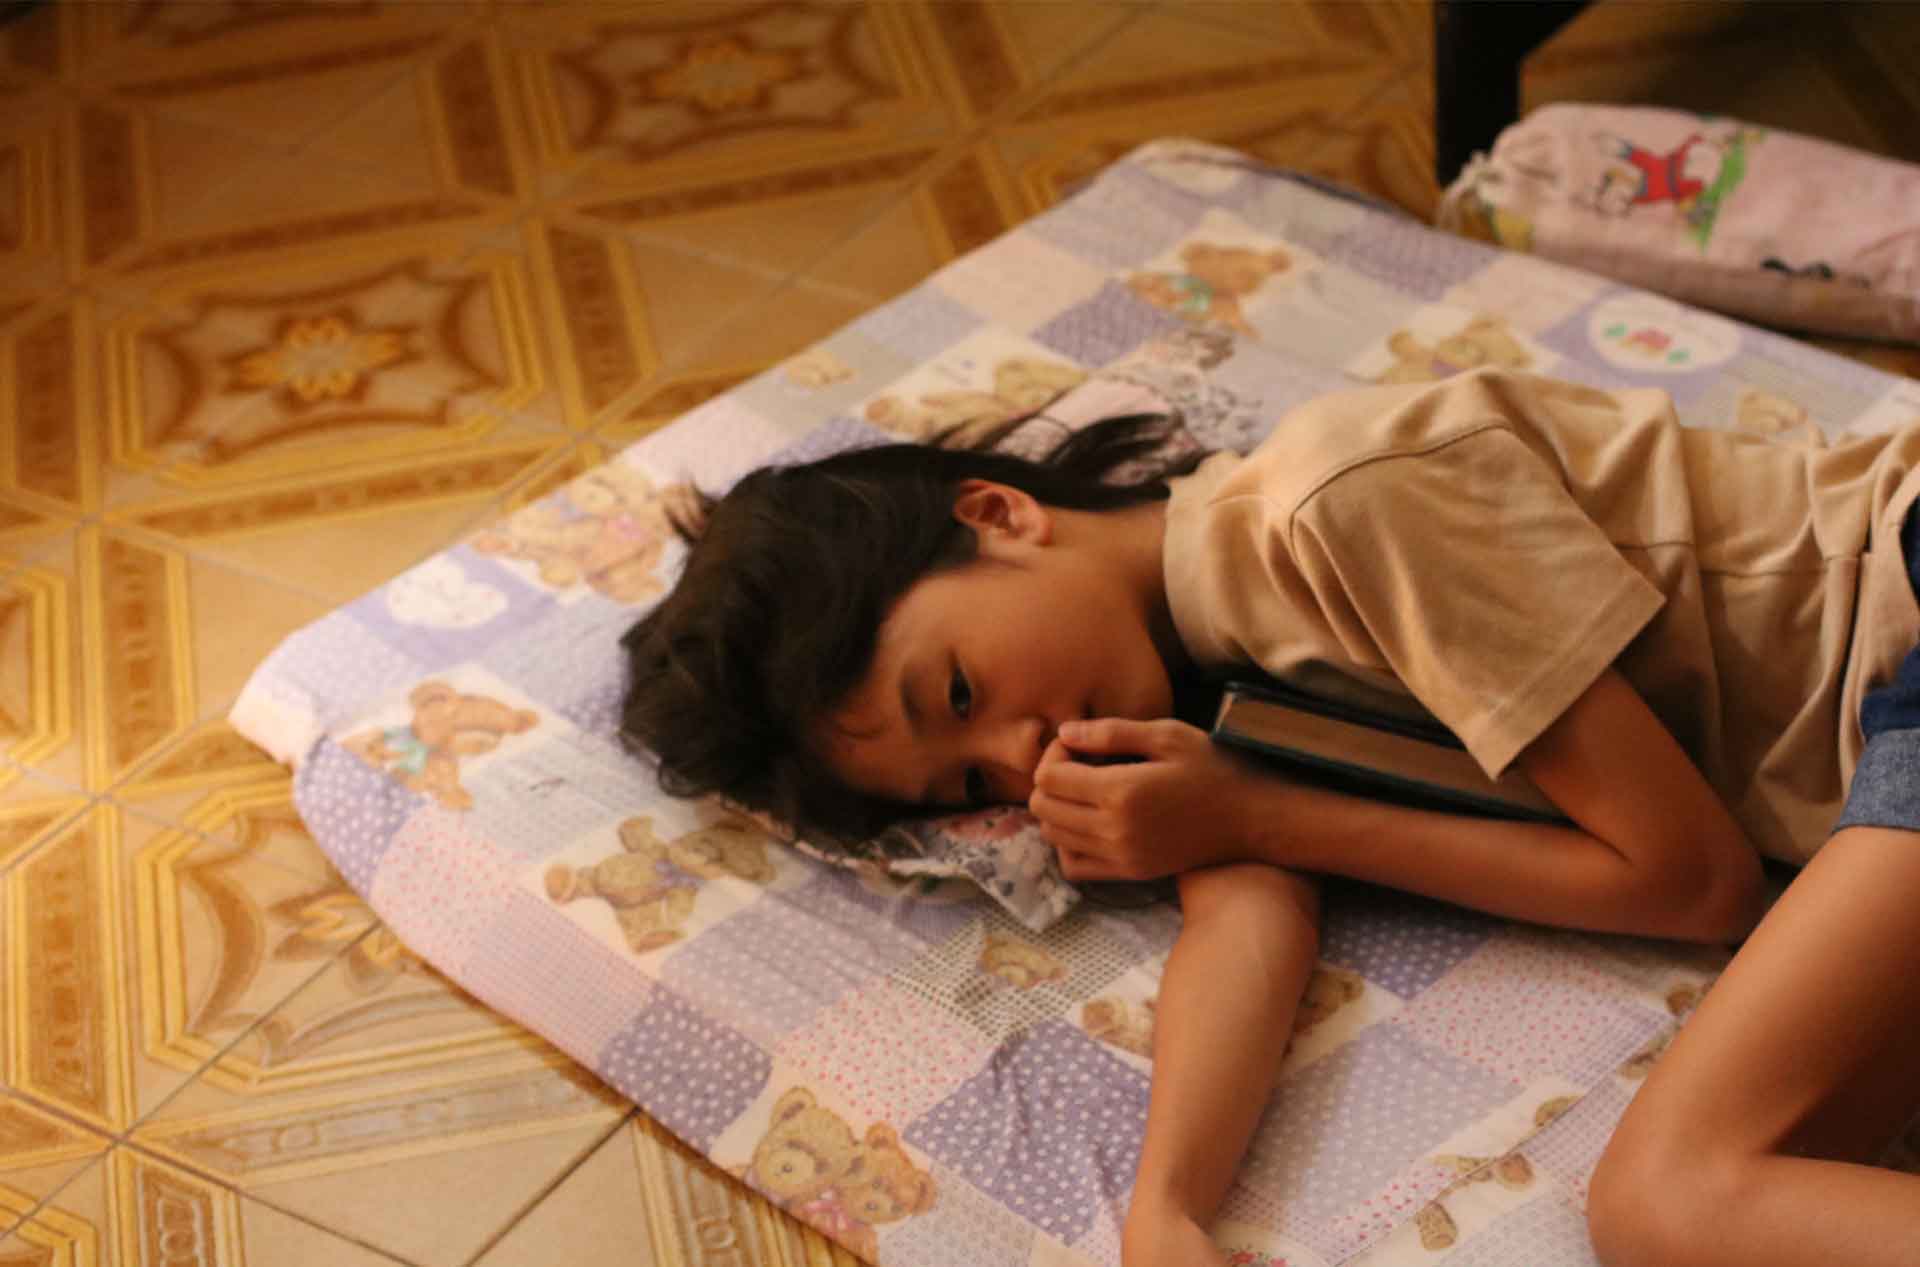 A girl laying on the floor on her side holding onto a book.